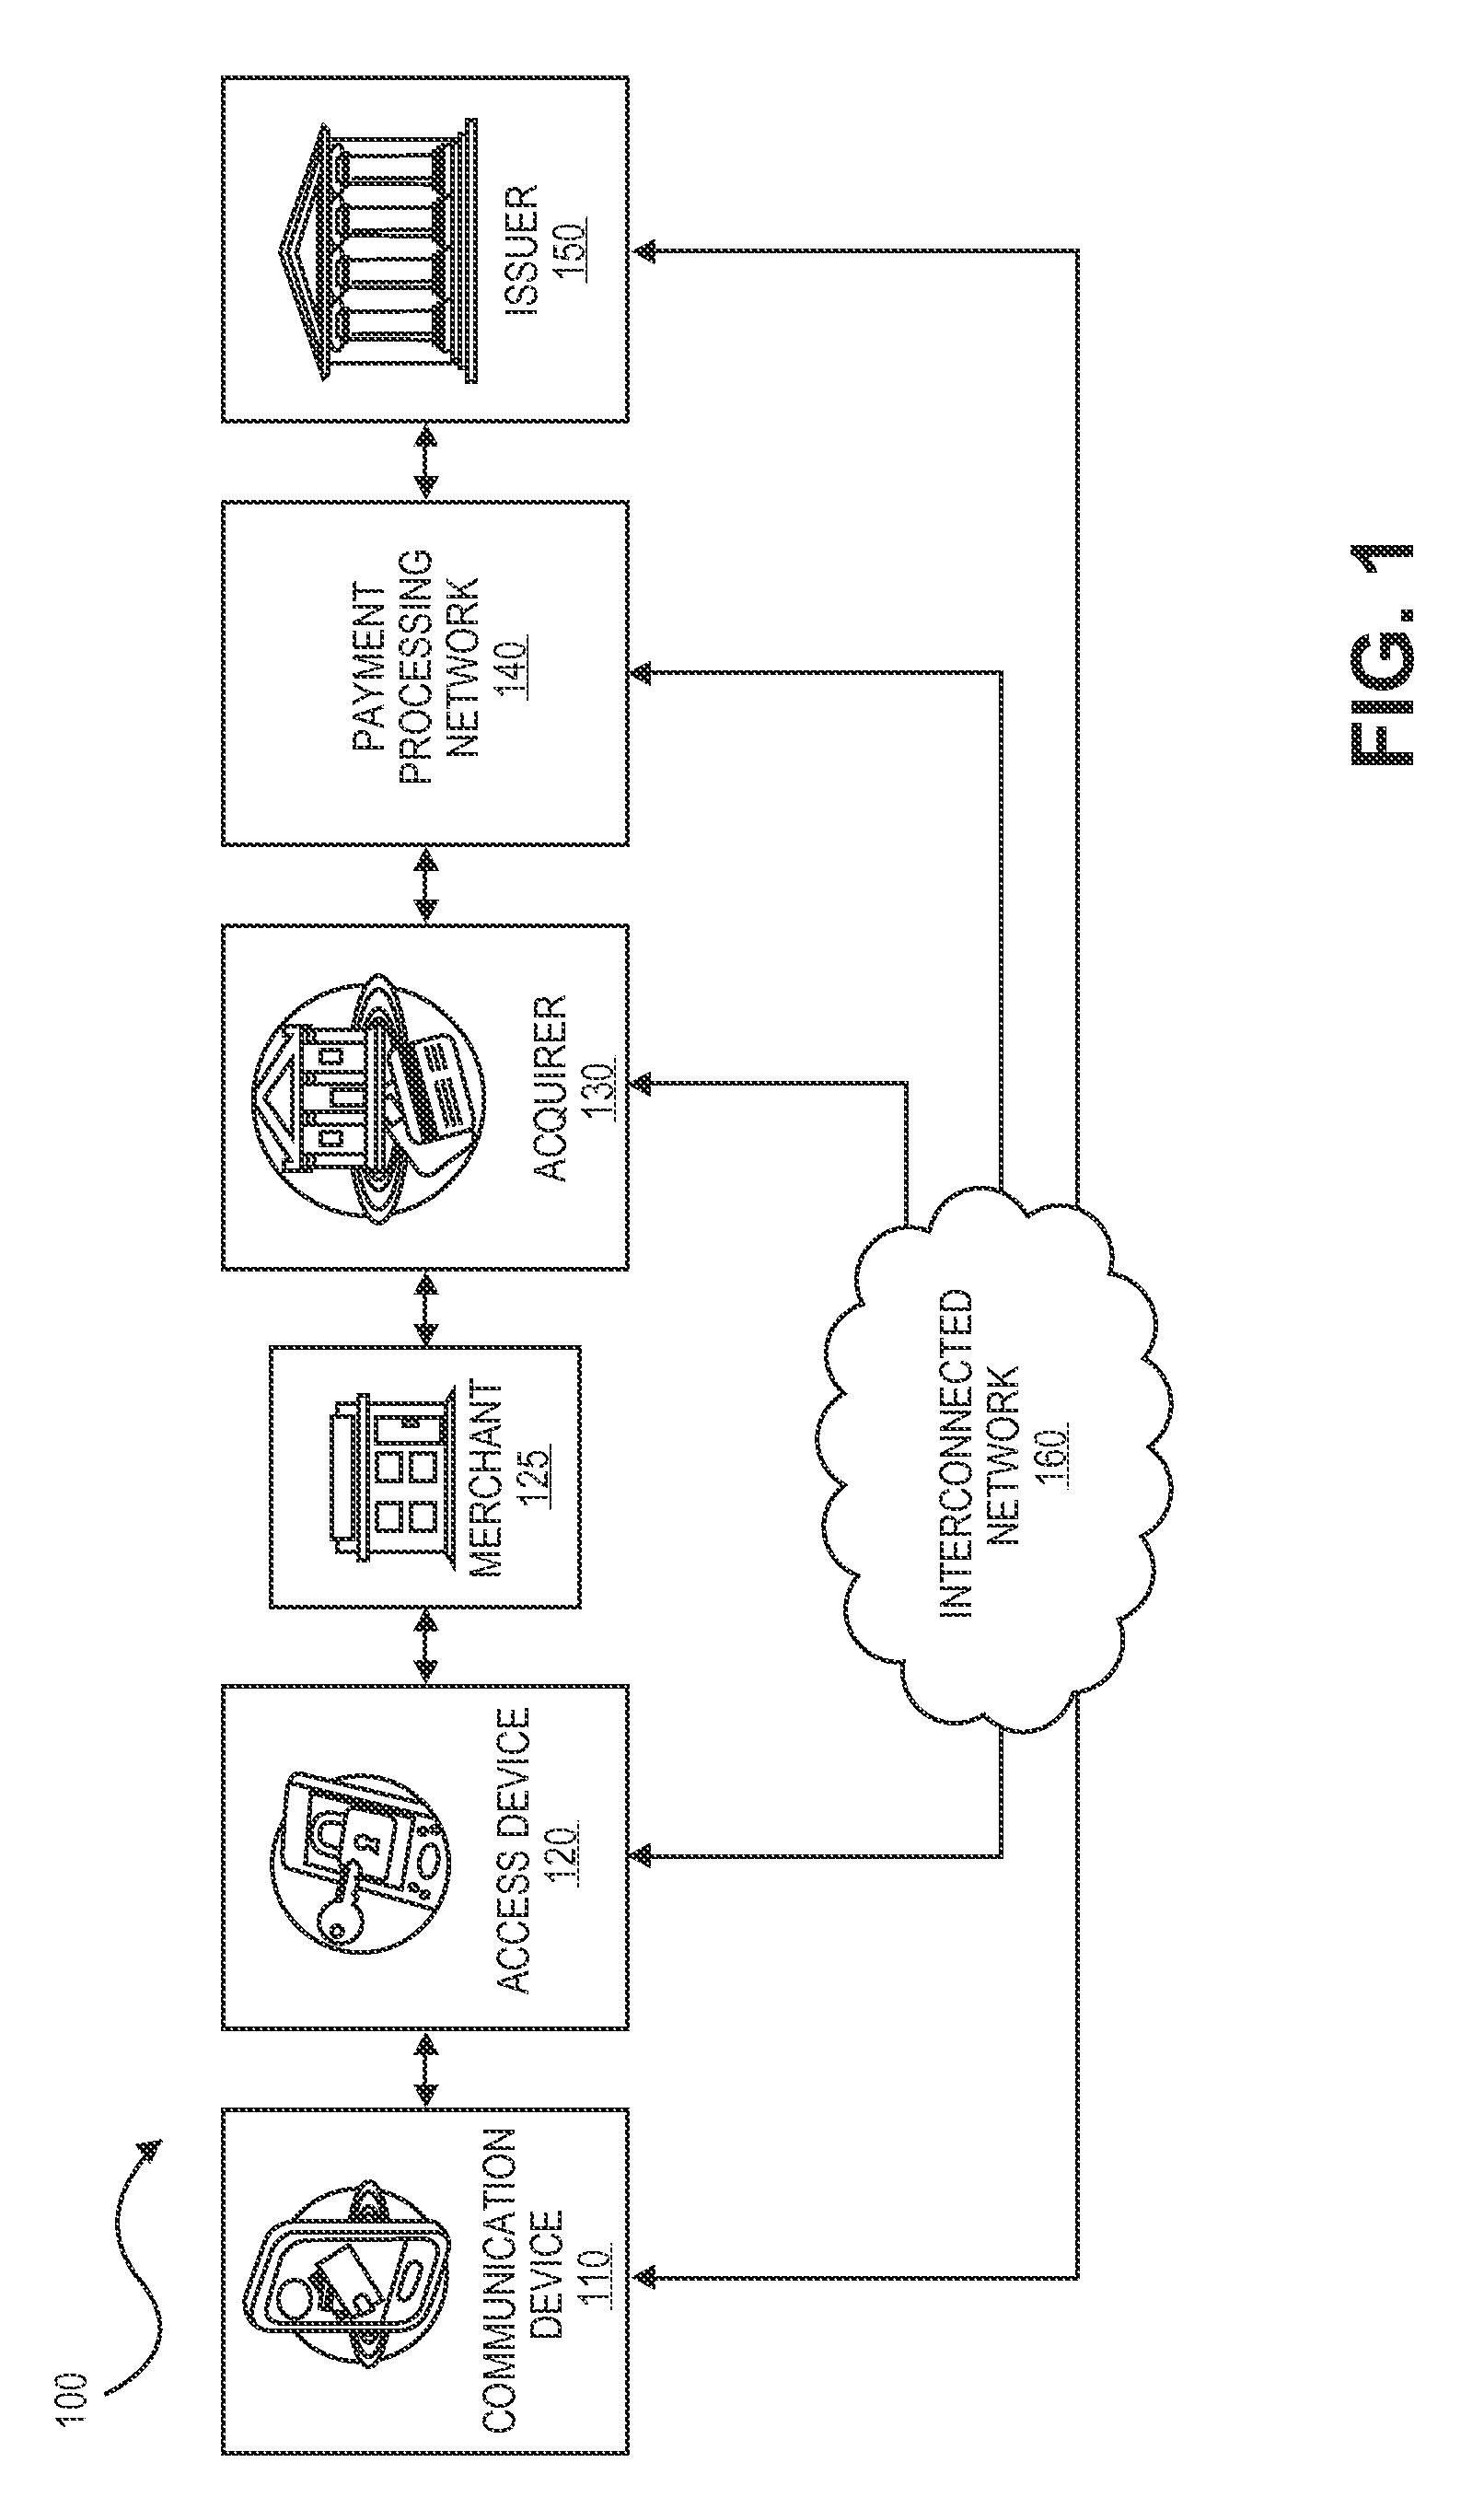 Systems and methods for incorporating qr codes